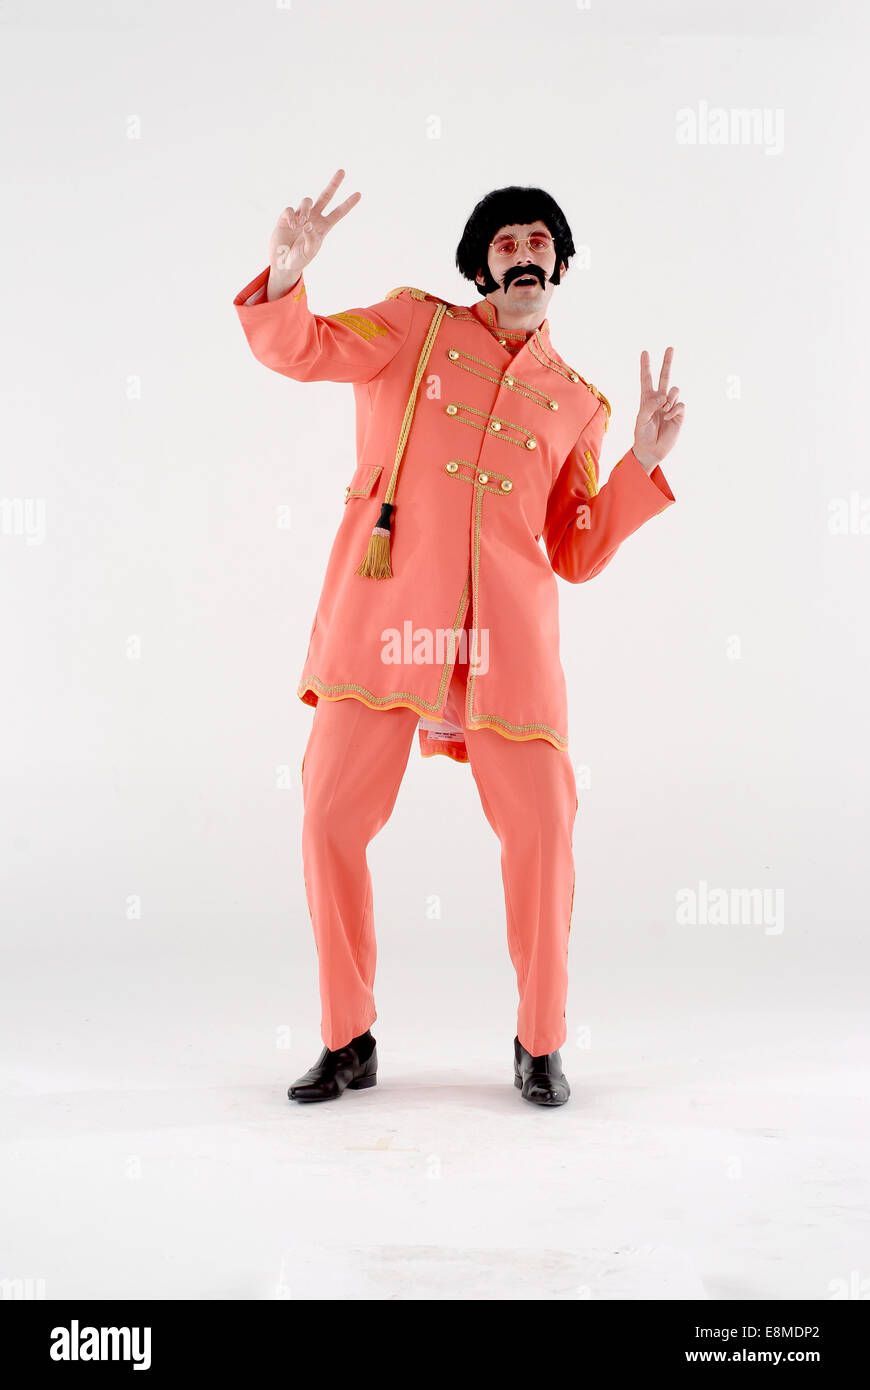 man in fancy dress comedy costume in Sargent Peppers military outfit as the Beatles from their famous album cover Stock Photo